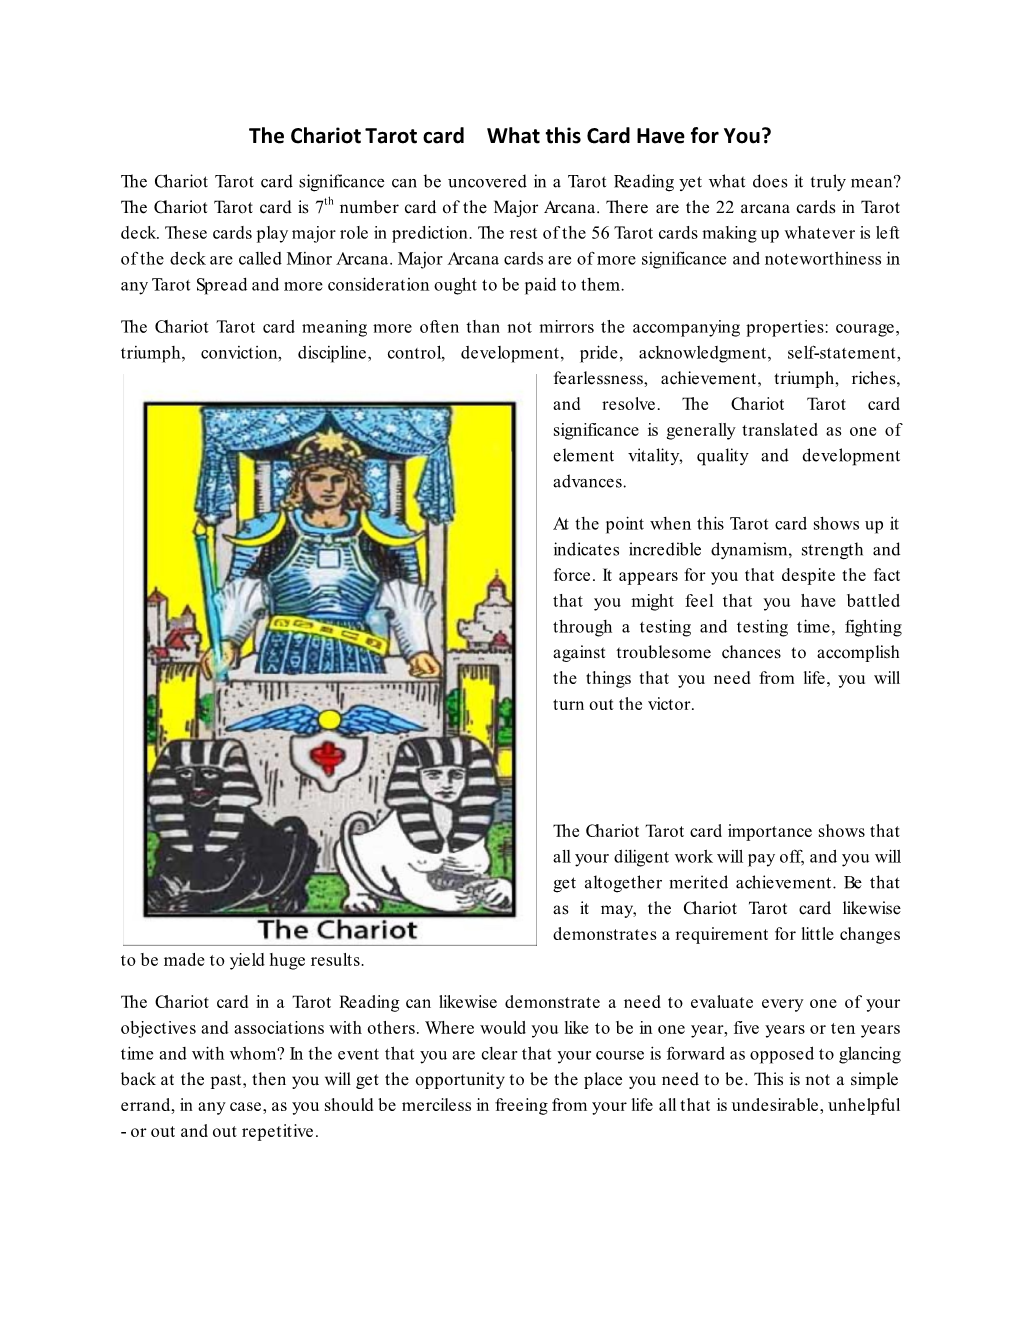 The Chariot Tarot Card What This Card Have for You?